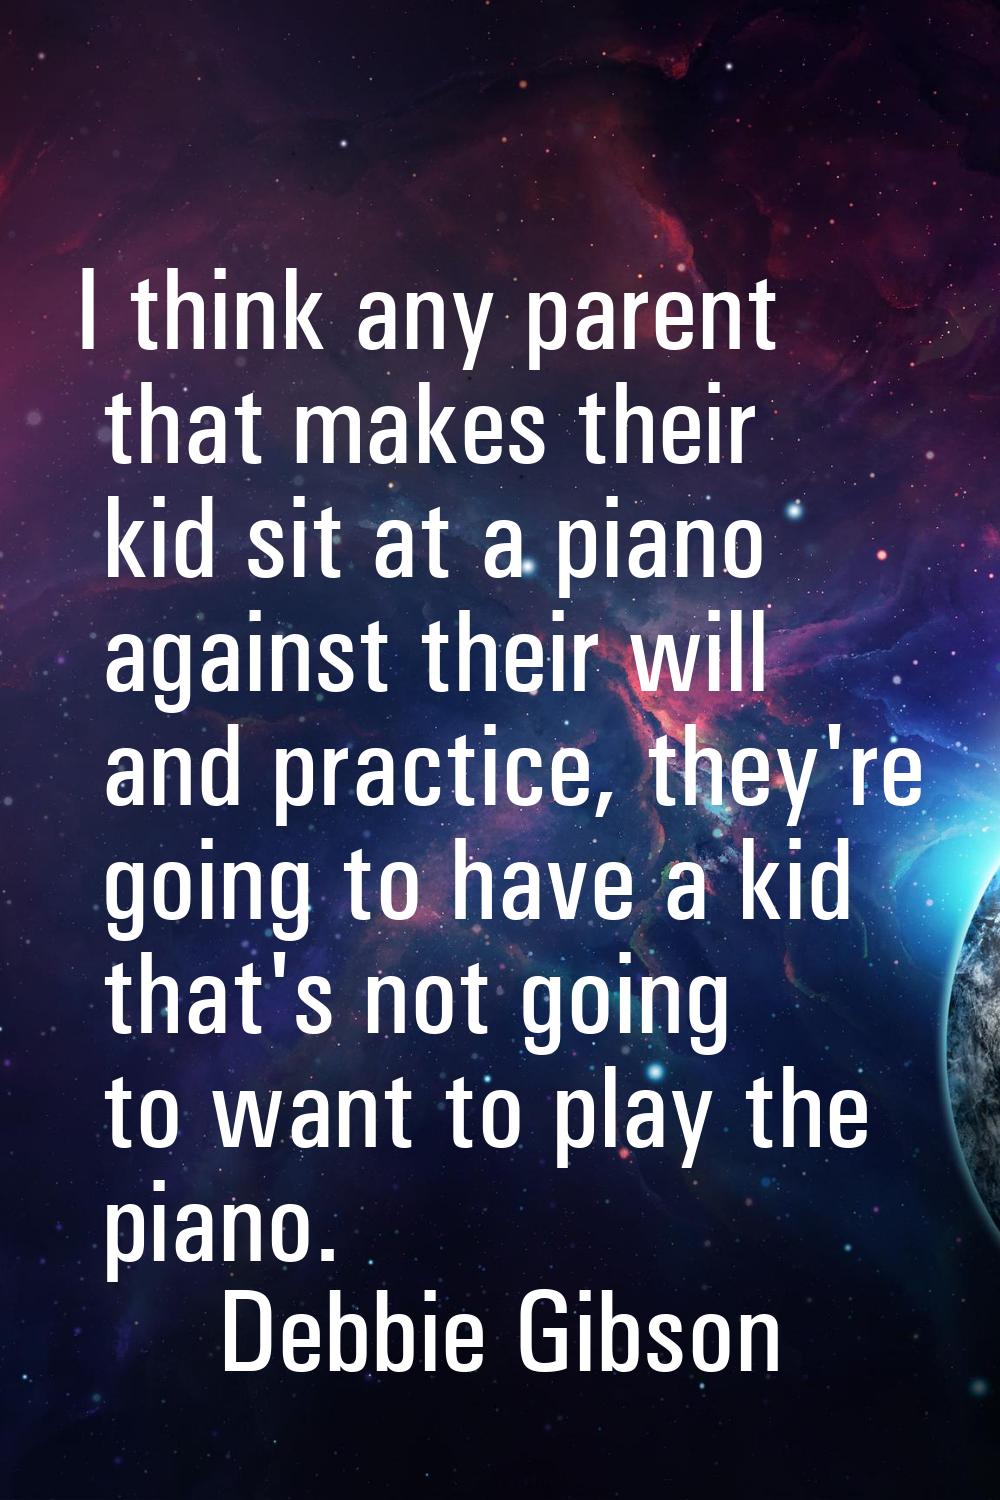 I think any parent that makes their kid sit at a piano against their will and practice, they're goi